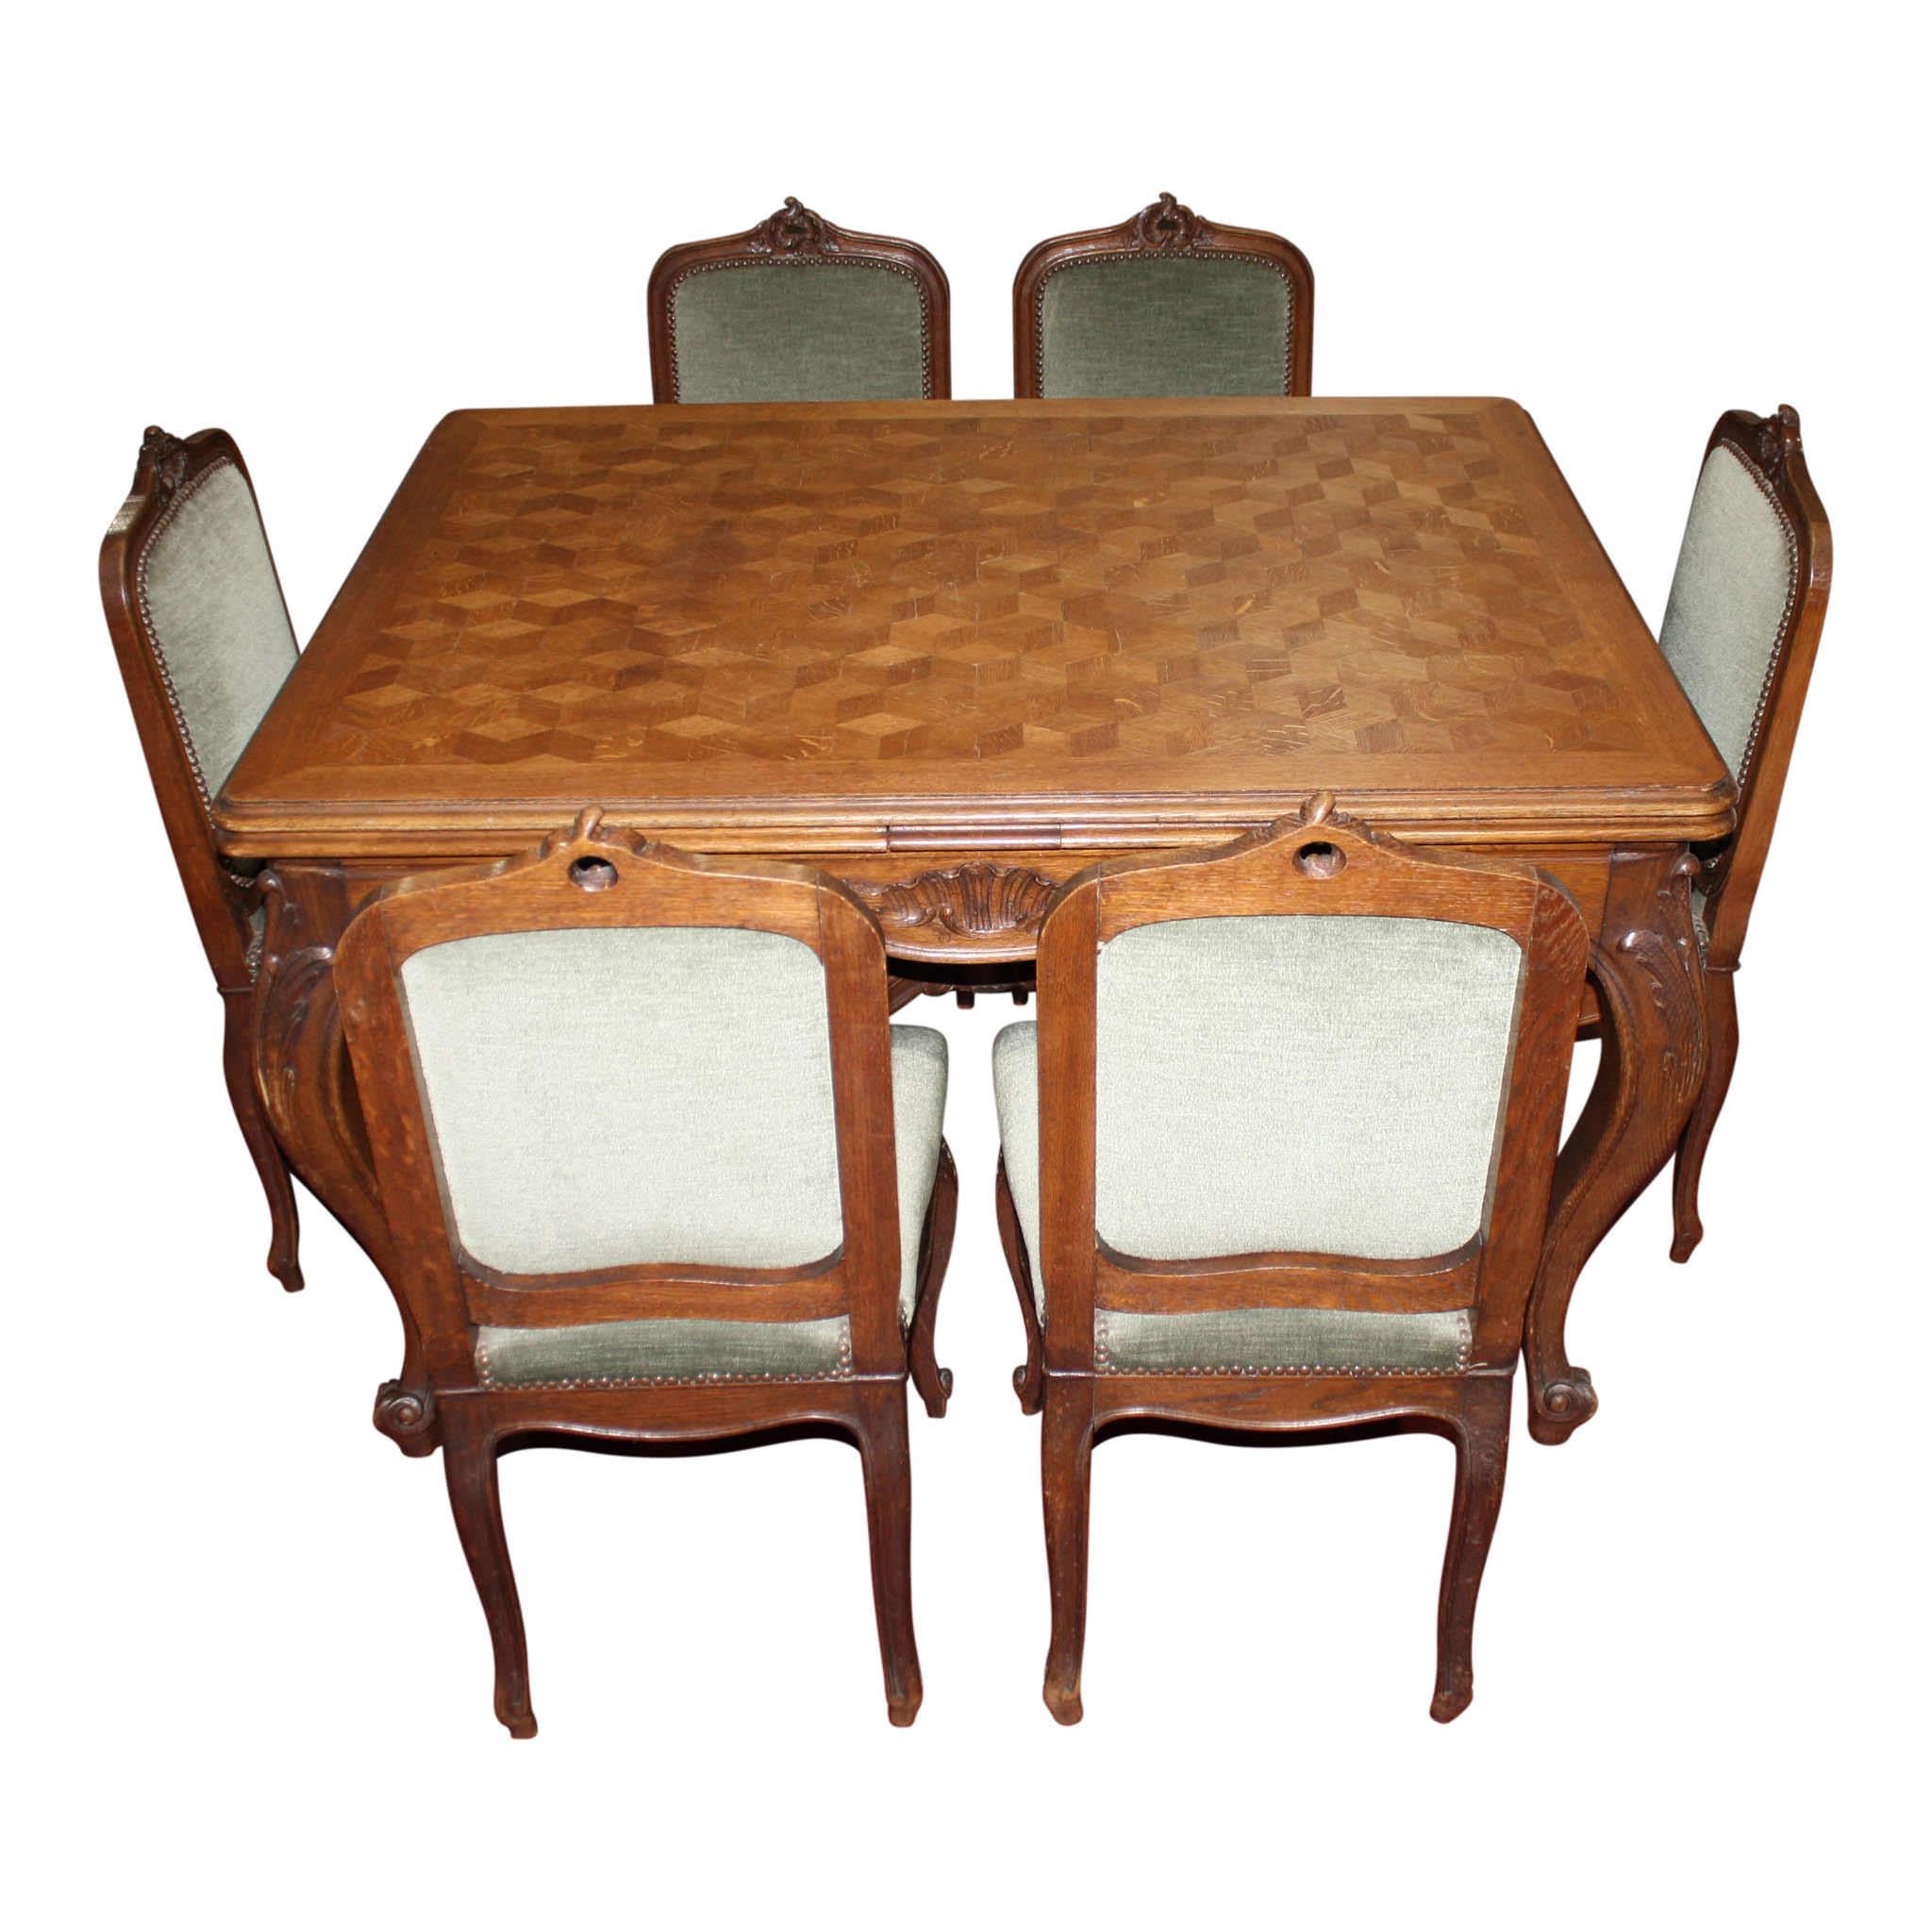 Comprised of a beautiful parquet table and six upholstered chairs, this elegant, oak, Louis XV dining set offers flexibility to extend the length of the table when the table's sliding leaves are pulled out. The table features a beveled edge around